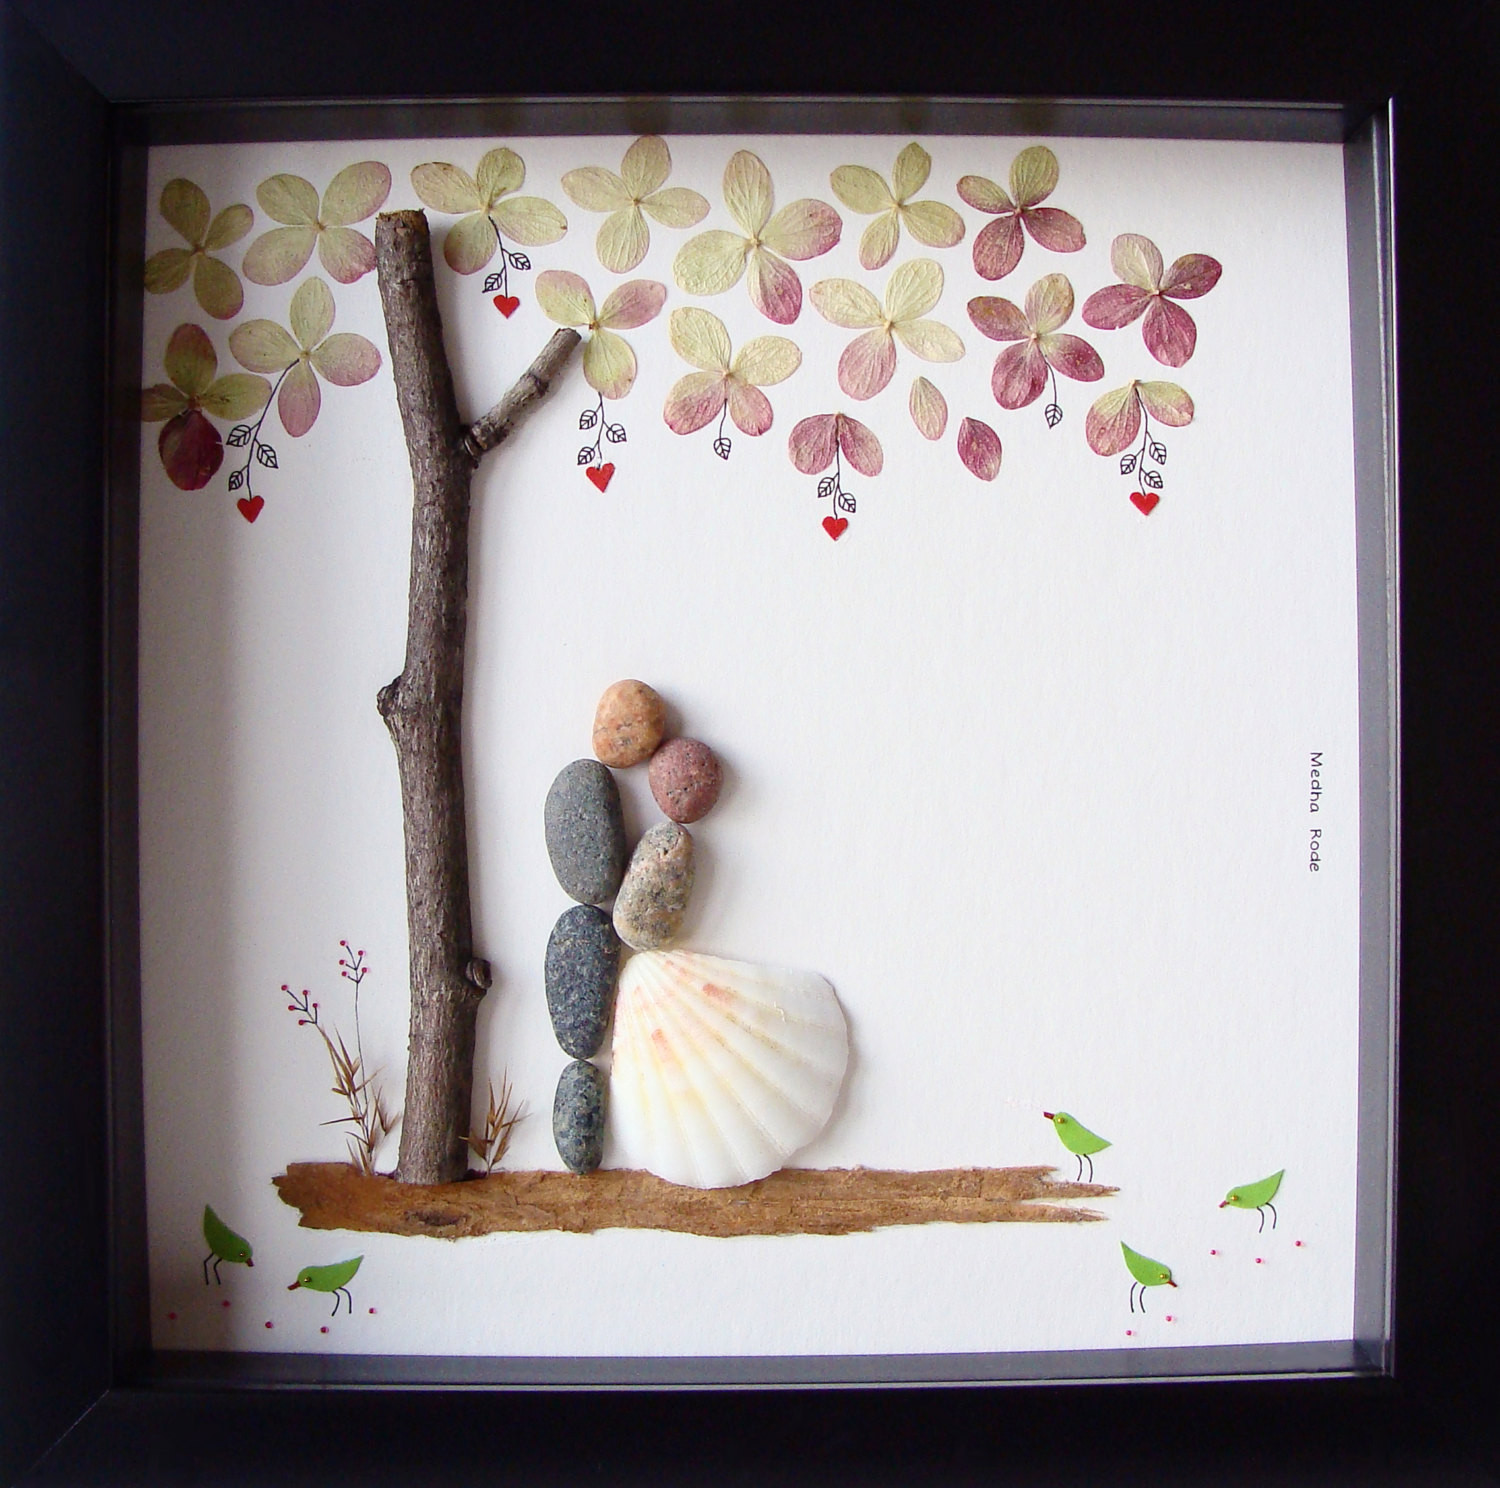 Cool Gift Ideas For Couples
 Unique Wedding Gift For Couple Wedding Pebble Art by MedhaRode